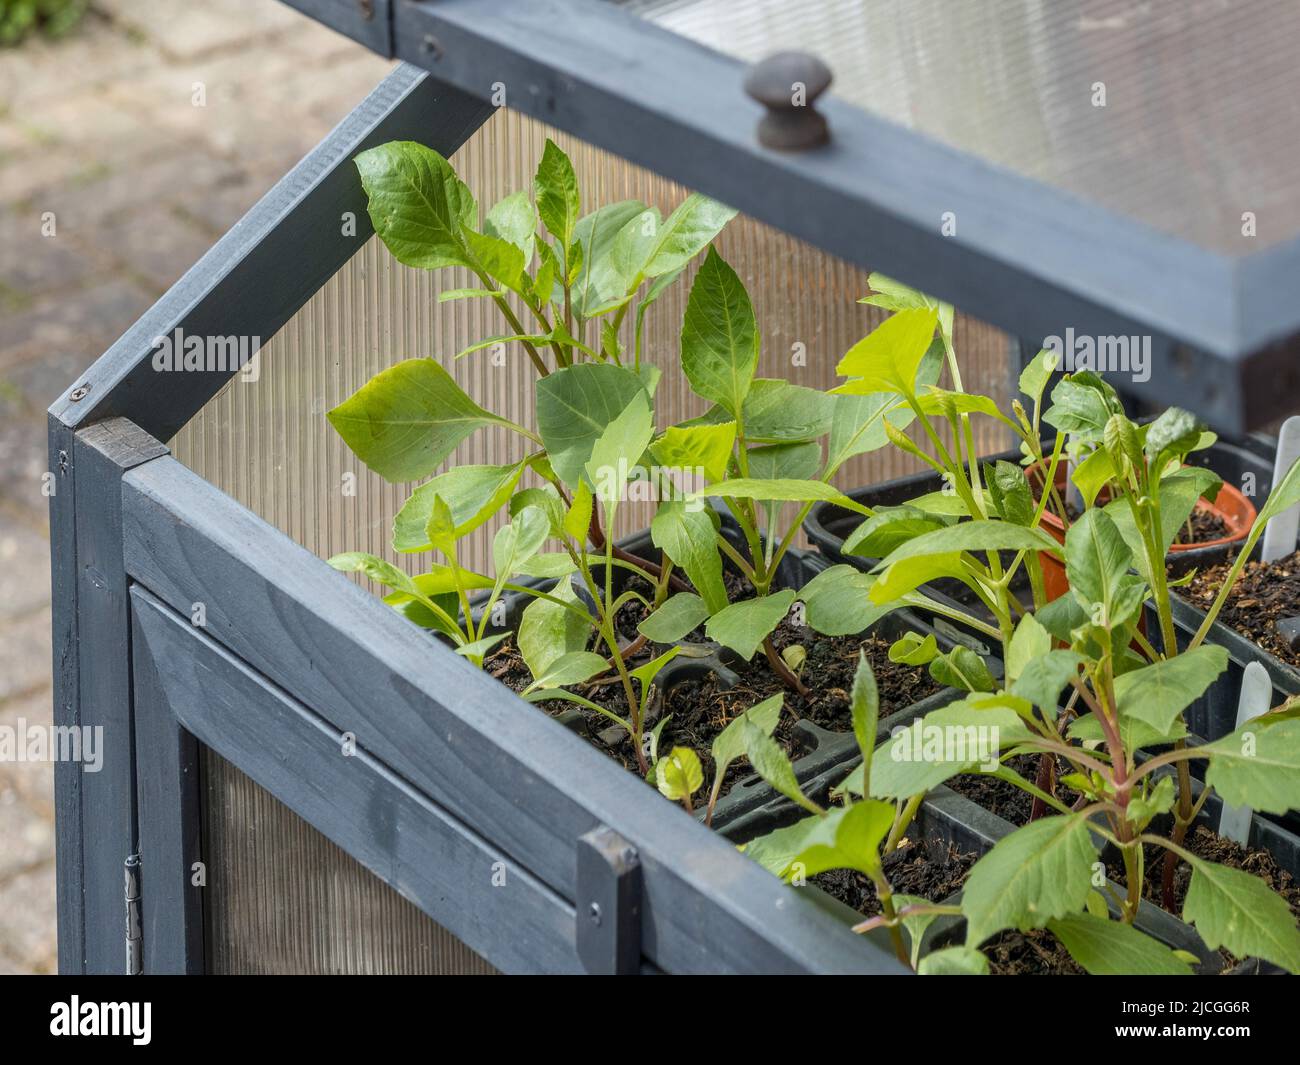 Dahlias plants in a partially opened cold frame being acclimatised to the cooler UK air temperature before being planted out. Stock Photo